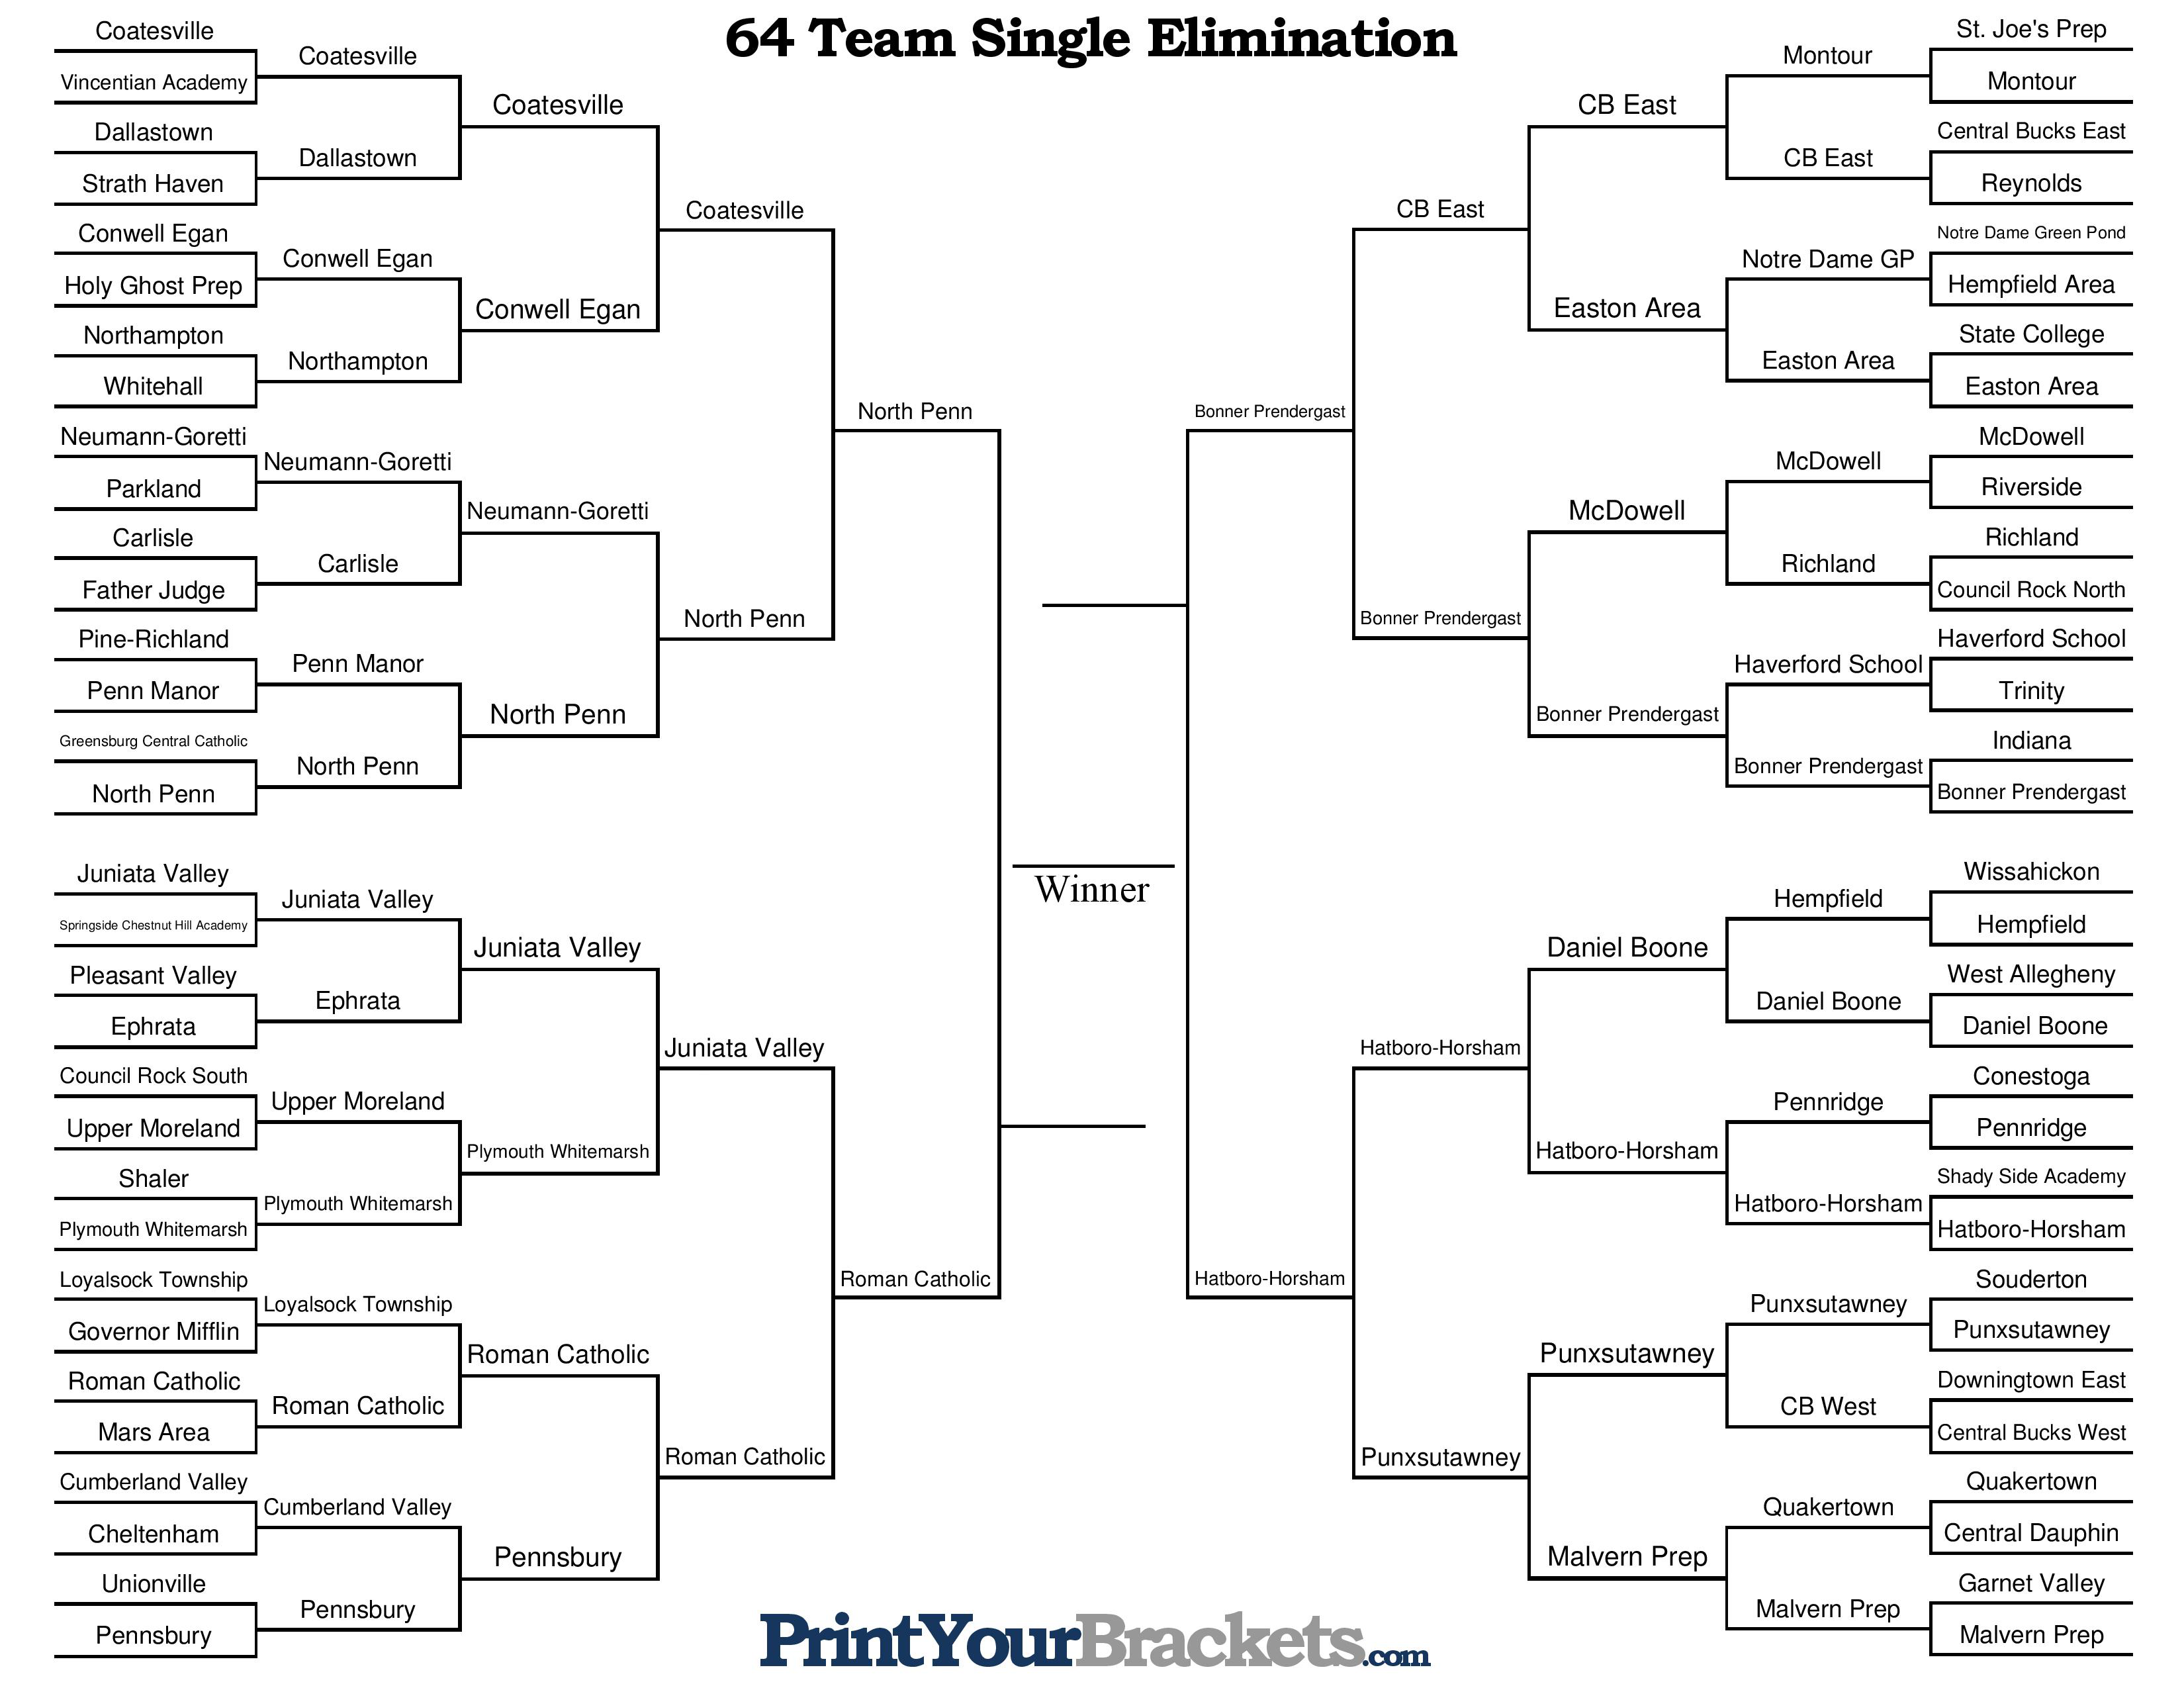 ----March Madness Final Four - MarchMadnessFinalFour.png